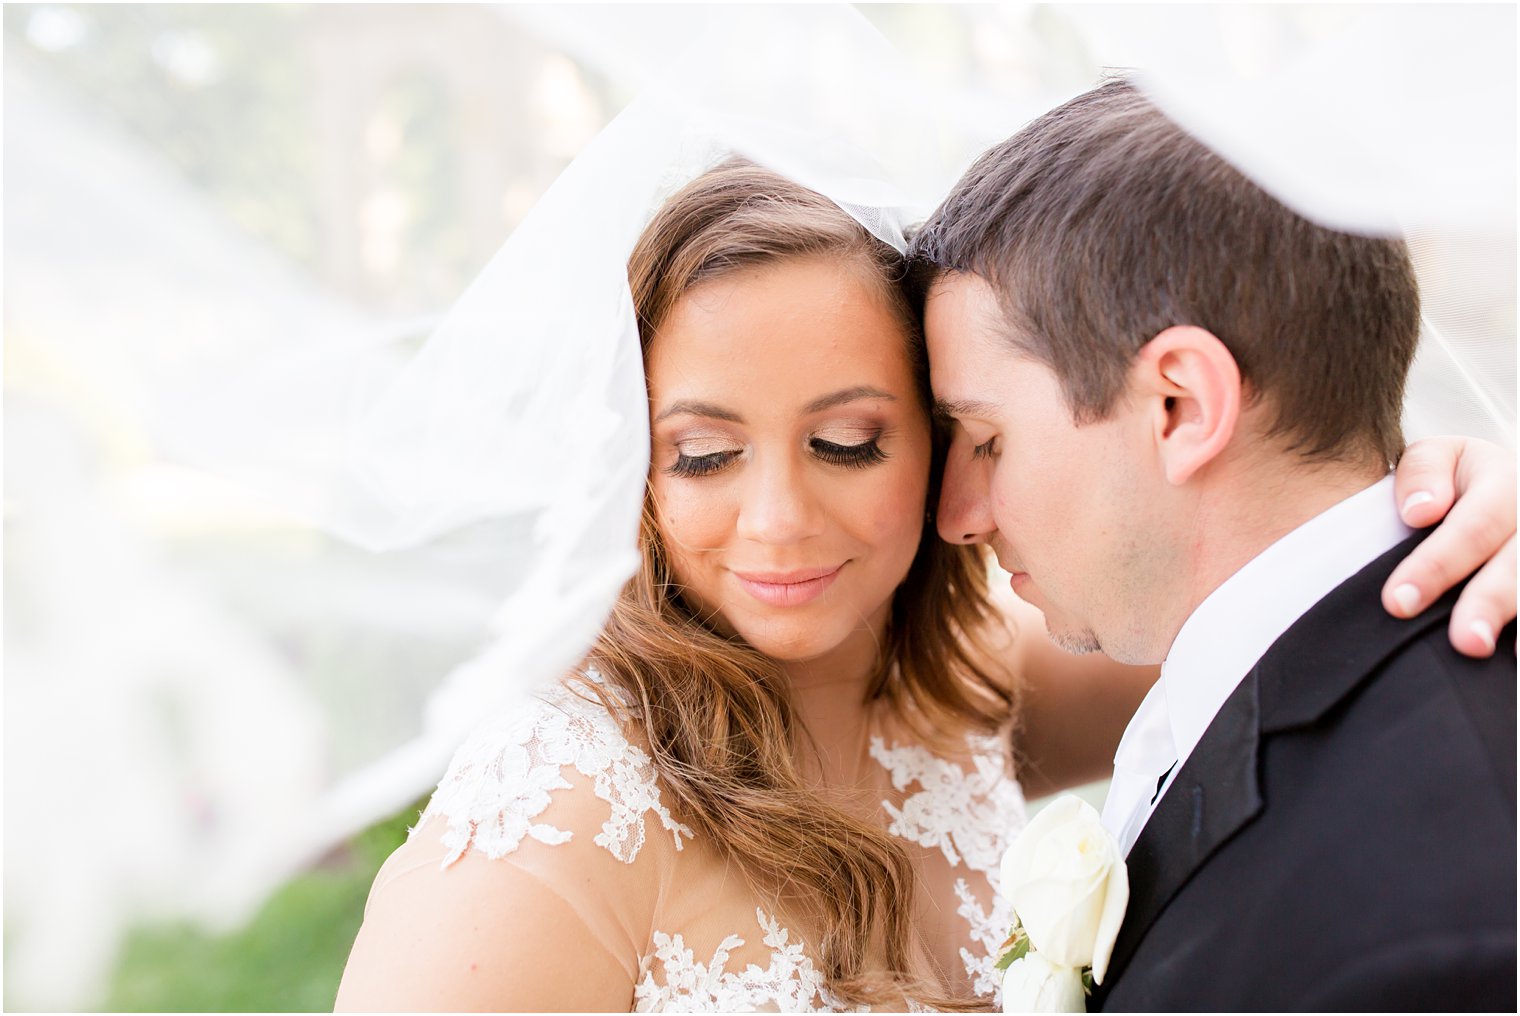 Elegant veiled portrait of bride and groom at Monmouth University